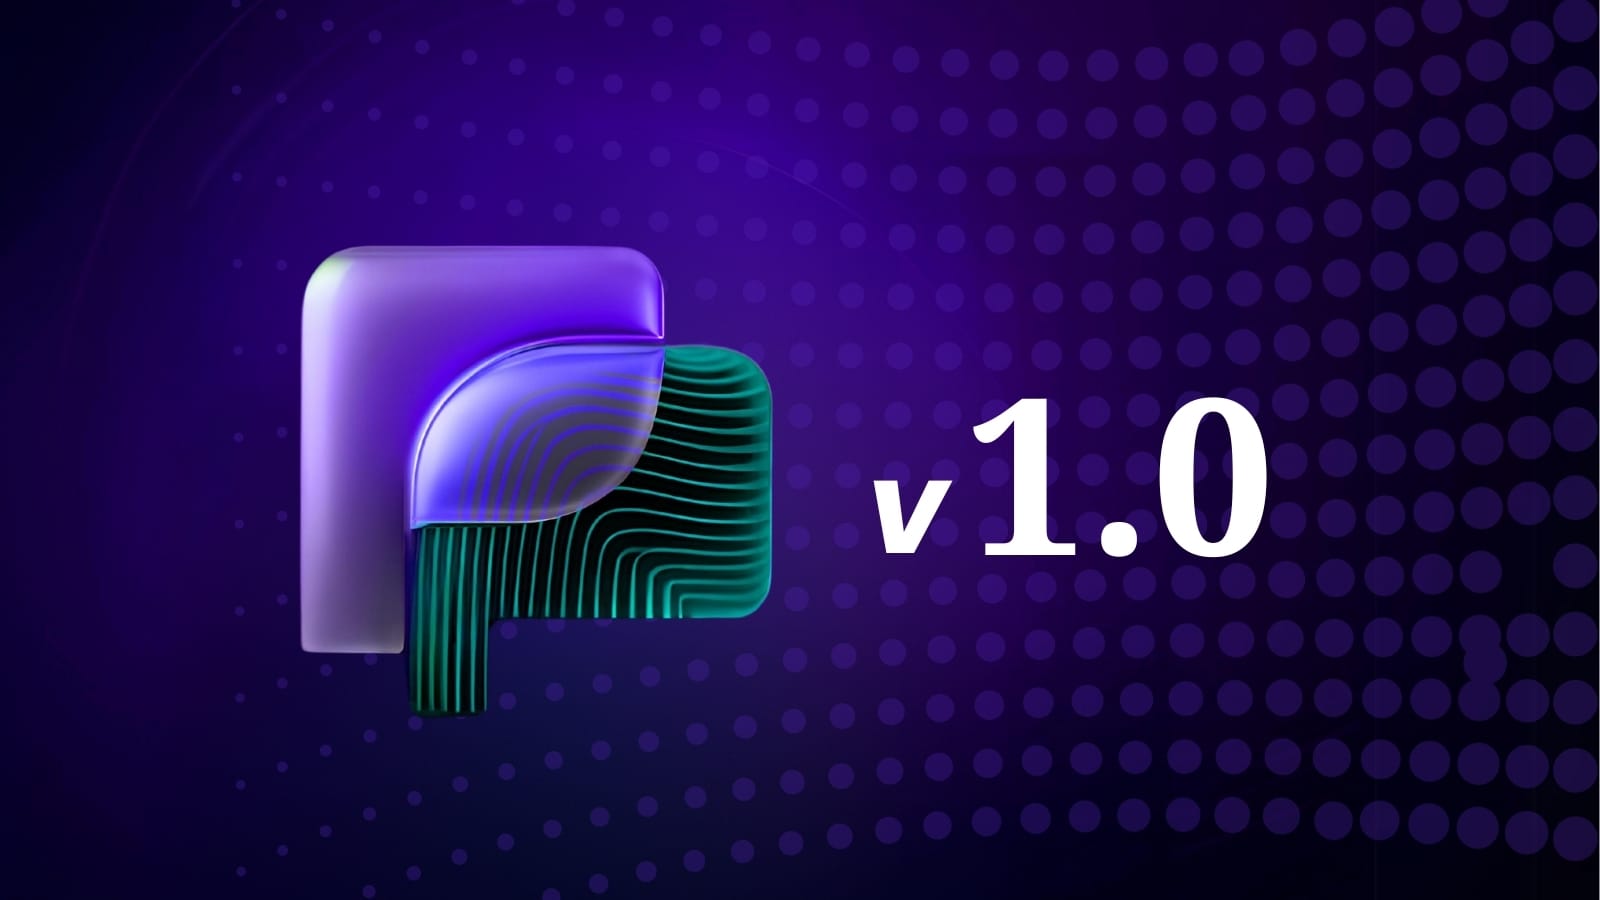 Logo with gradient blue-purple background, wave pattern, "v1.0" text, and abstract multicolored shapes at the forefront.